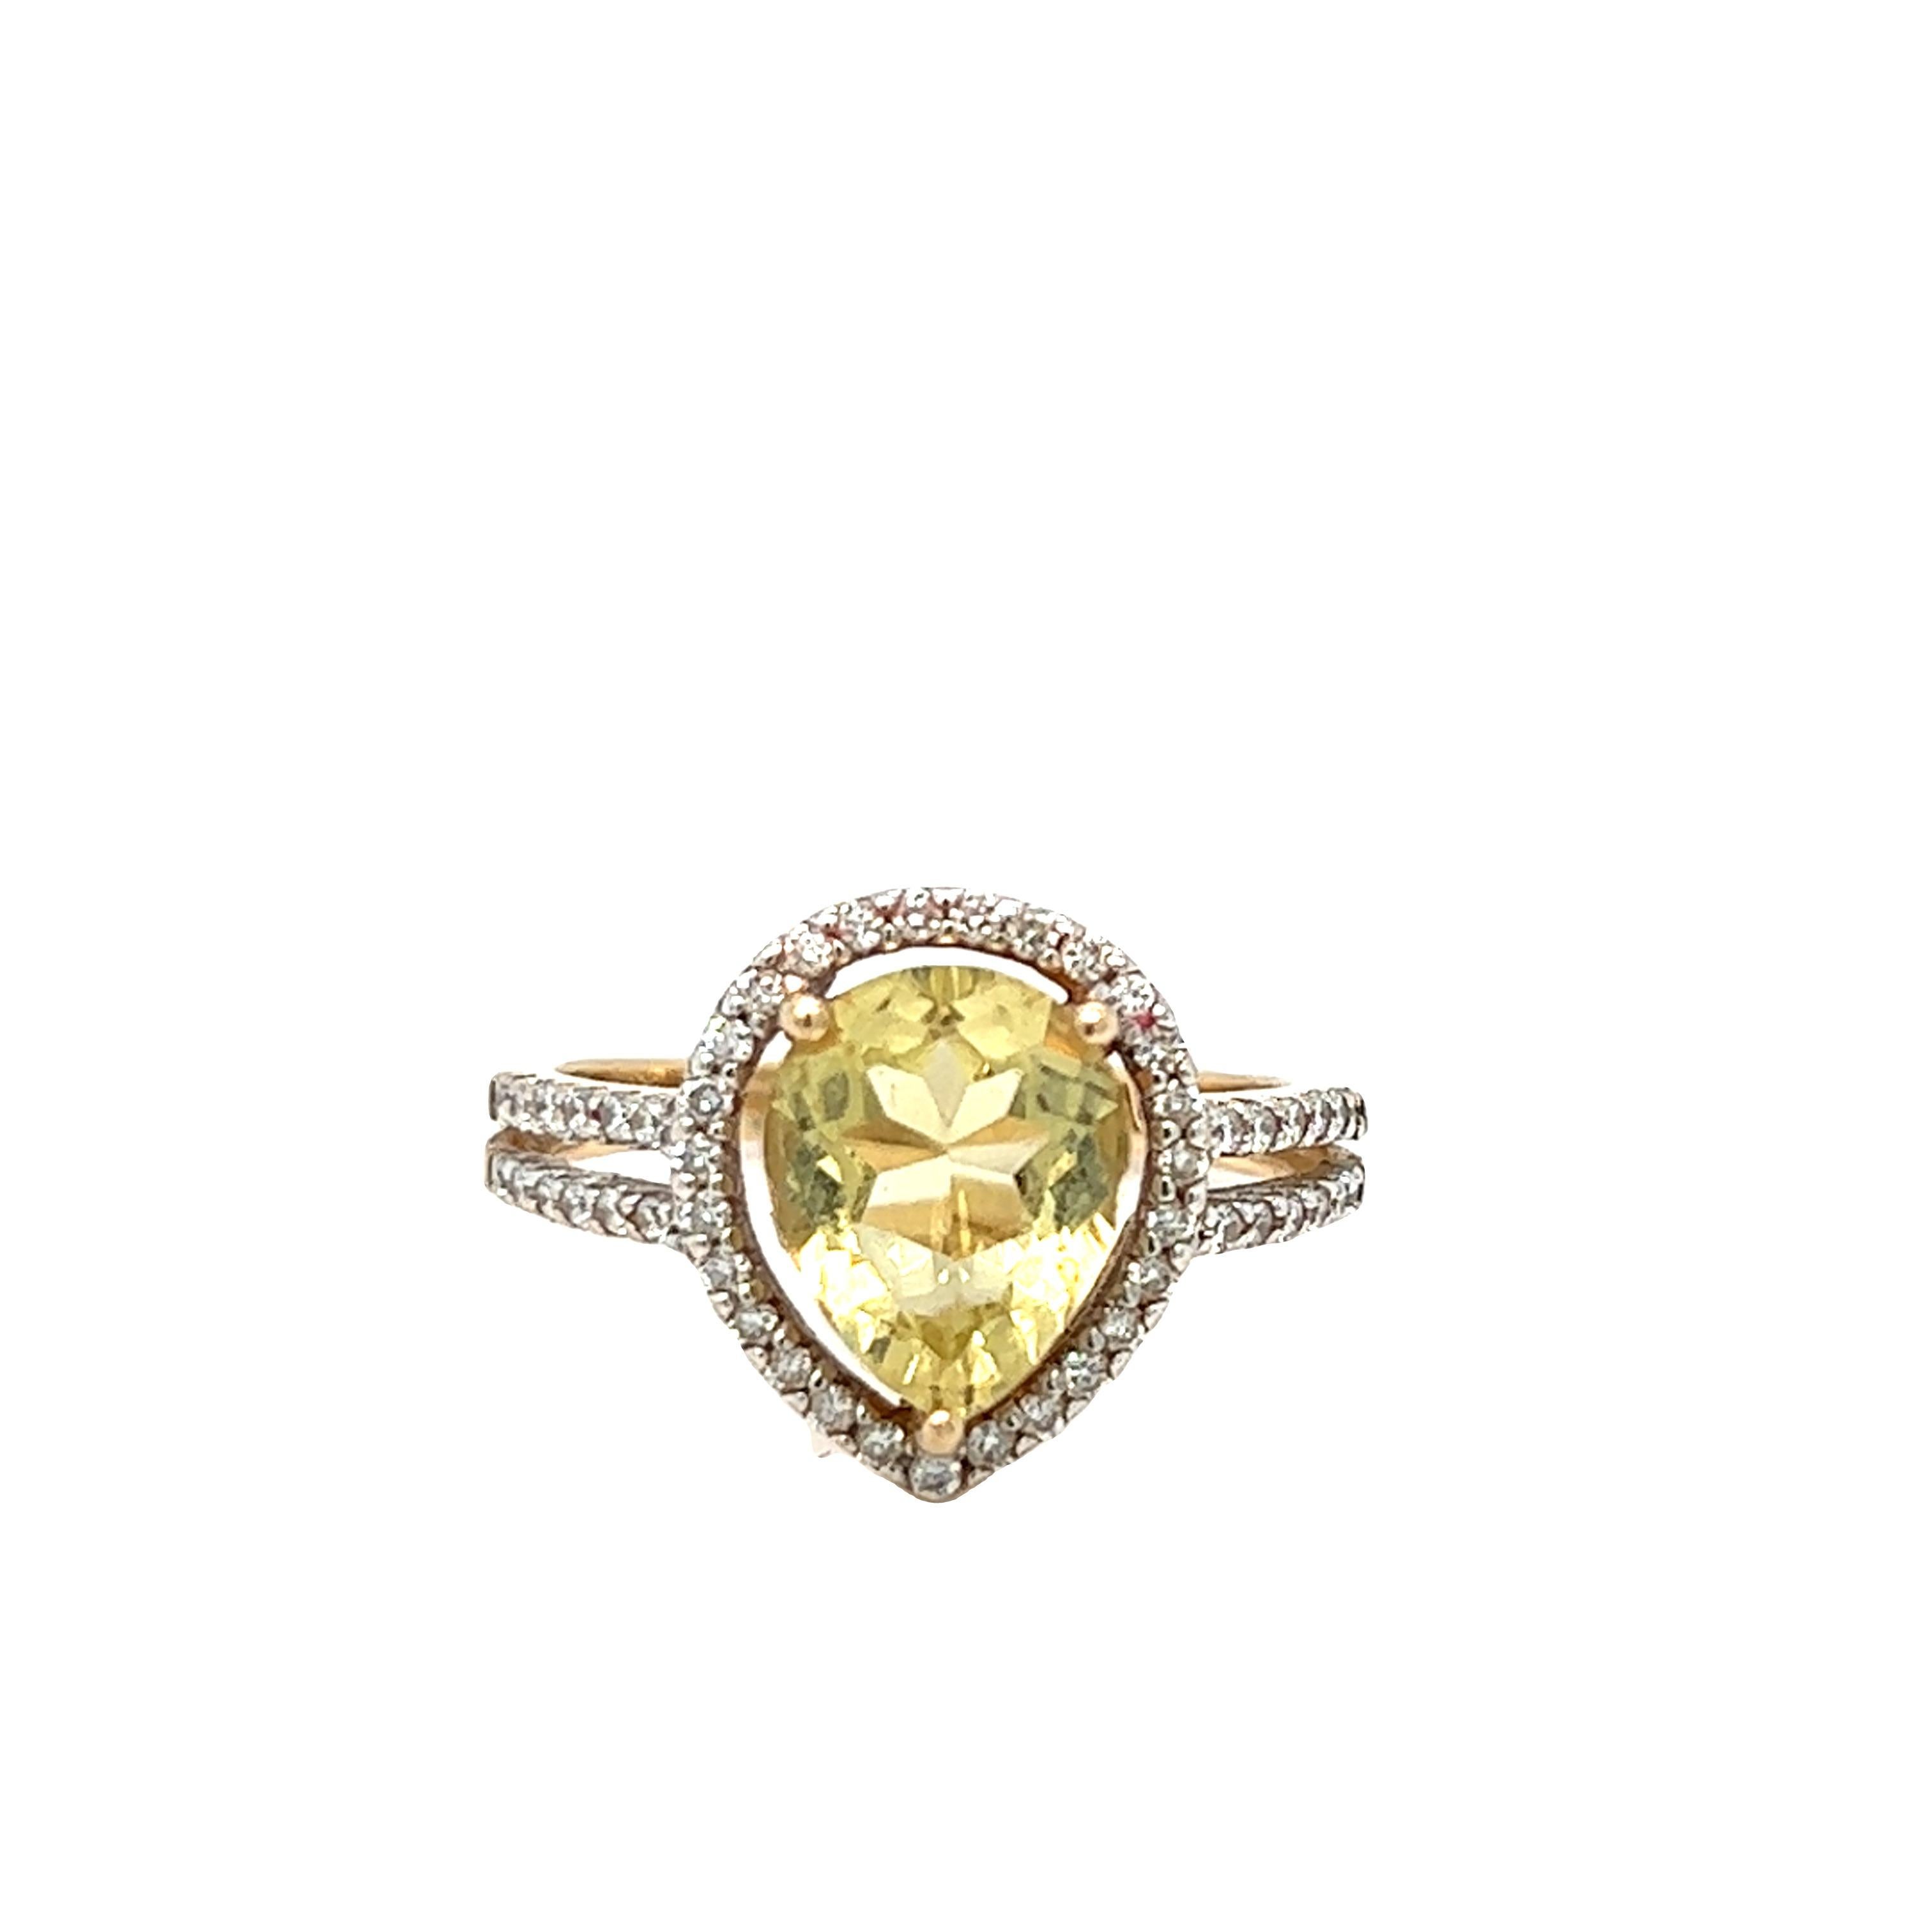 This beautiful pear-shaped golden yellow beryl is encircled in round brilliant diamond cut halo. The split shanks add a modern touch to the ring. The yellow beryl center stone weighs approximately 2.50 carats and measures 10.6 x 7.7 x 5 mm. The